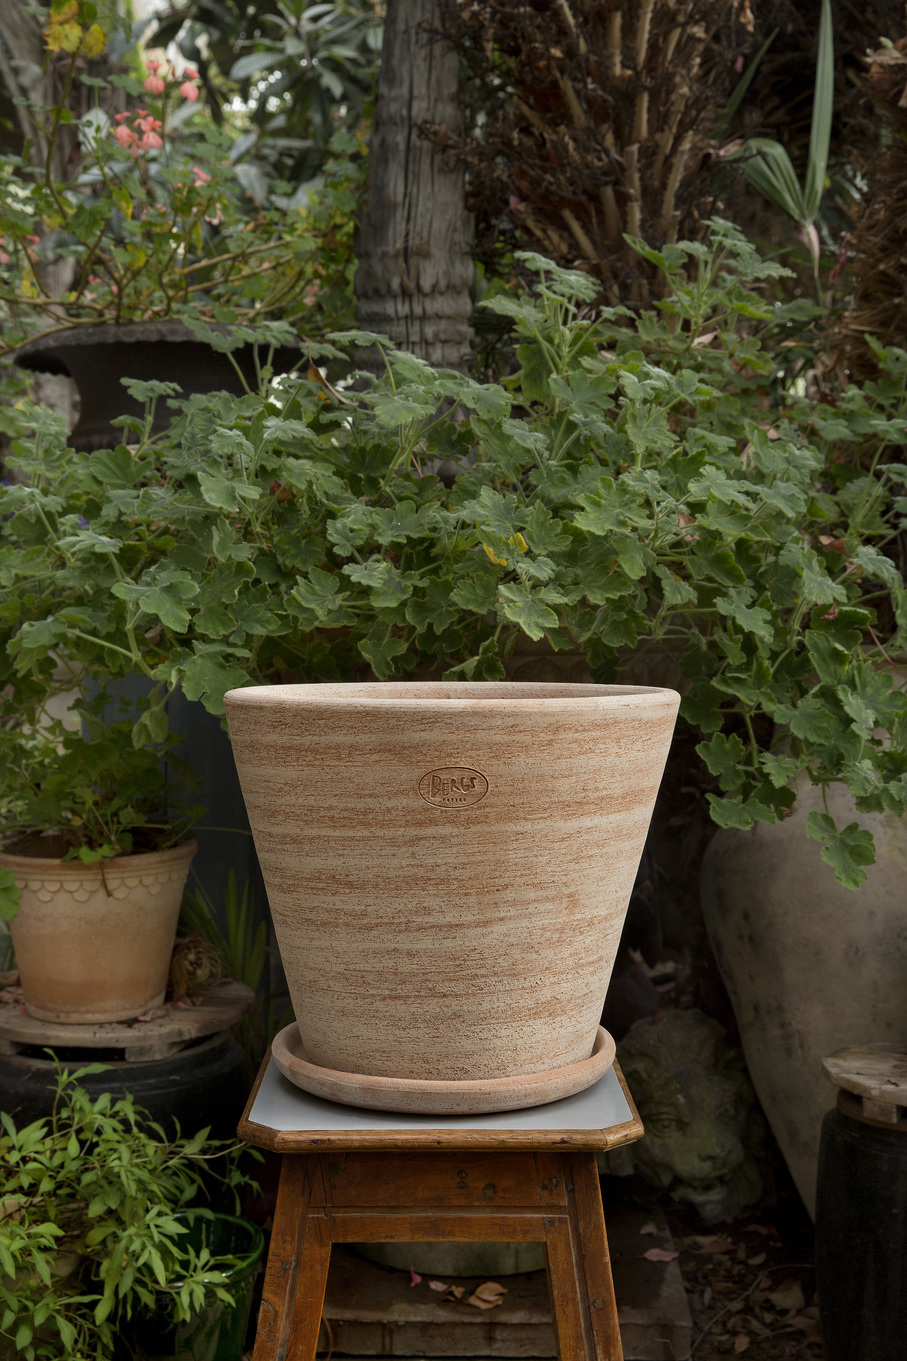 Raw rose terracotta outdoor pot on a stool surrounded by plants.